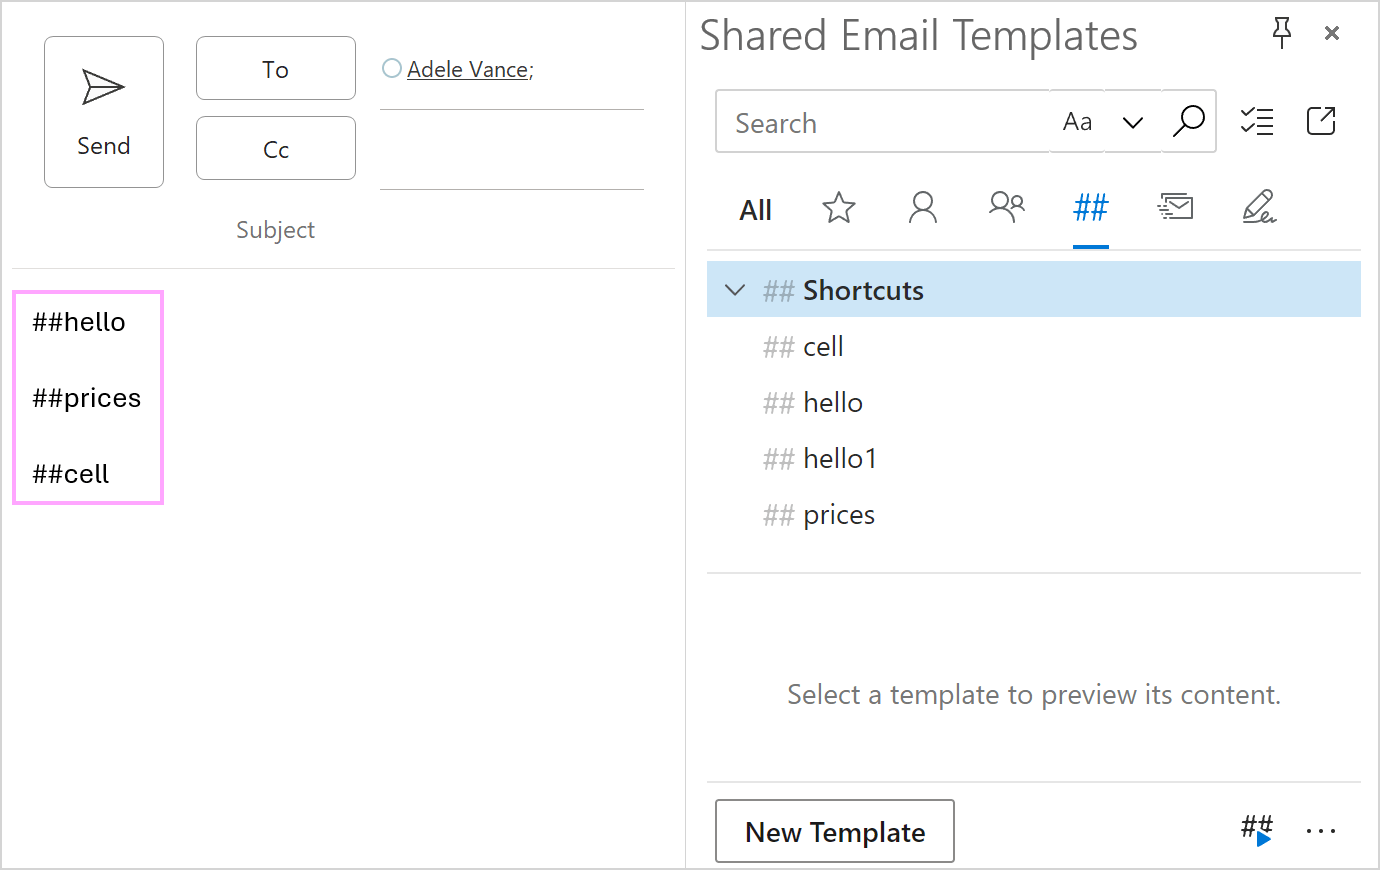 Template shortcuts in the message body